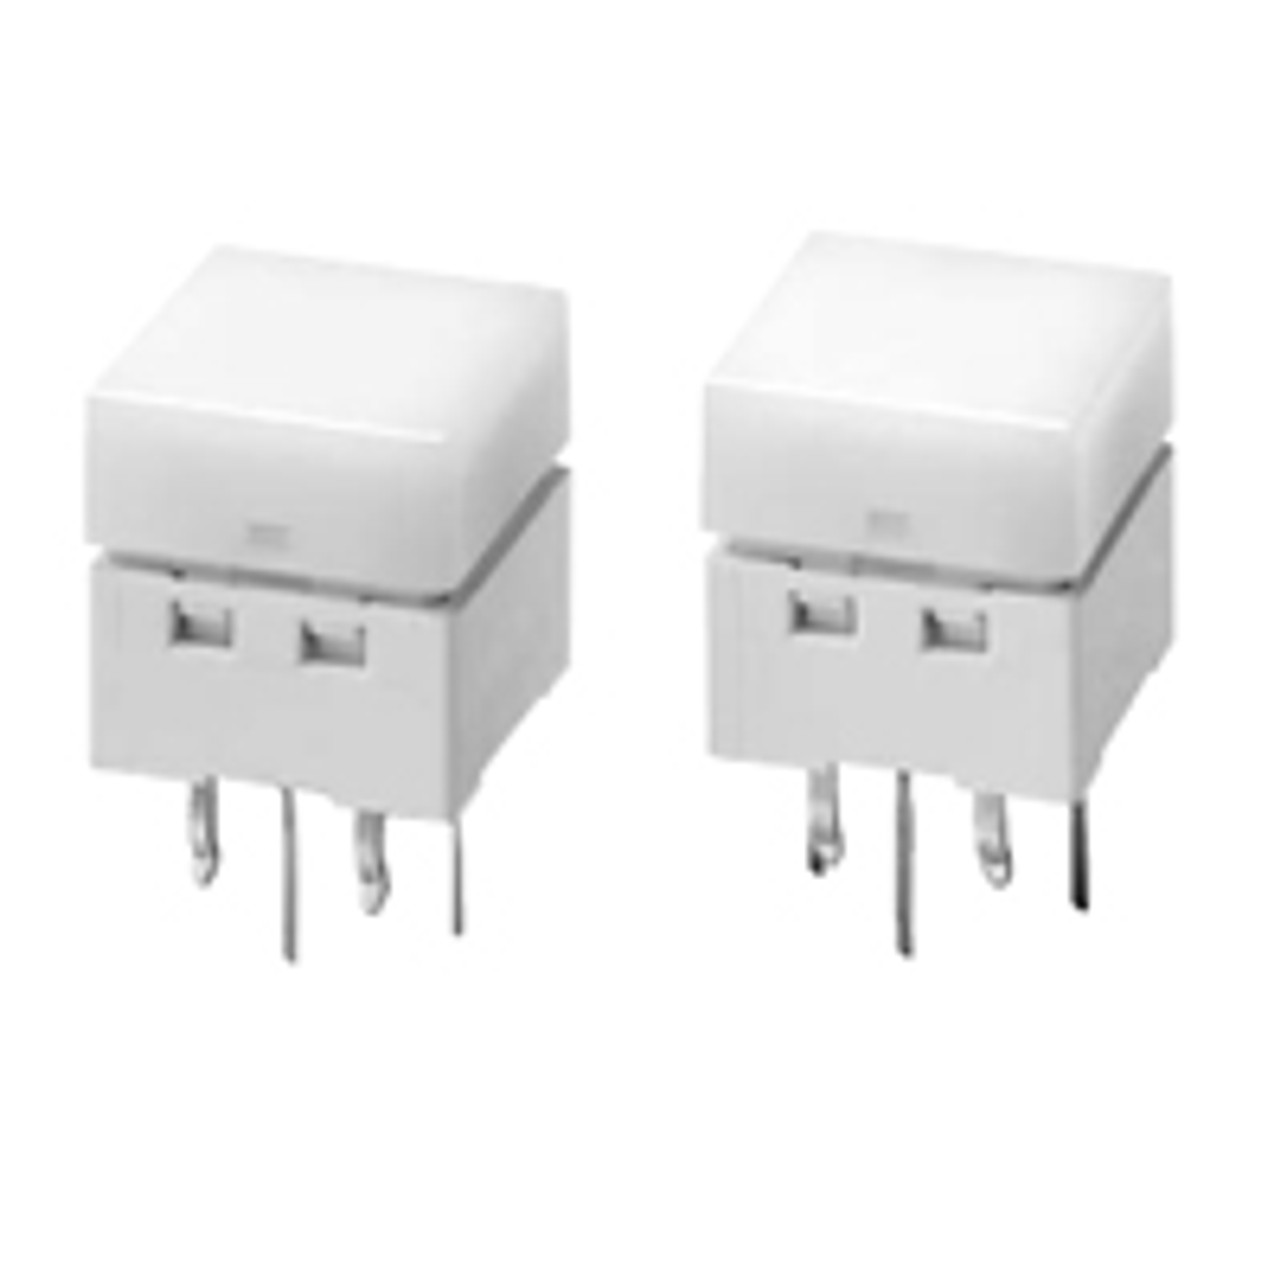 Omron B3W-9012-Y1N Tactile Switches